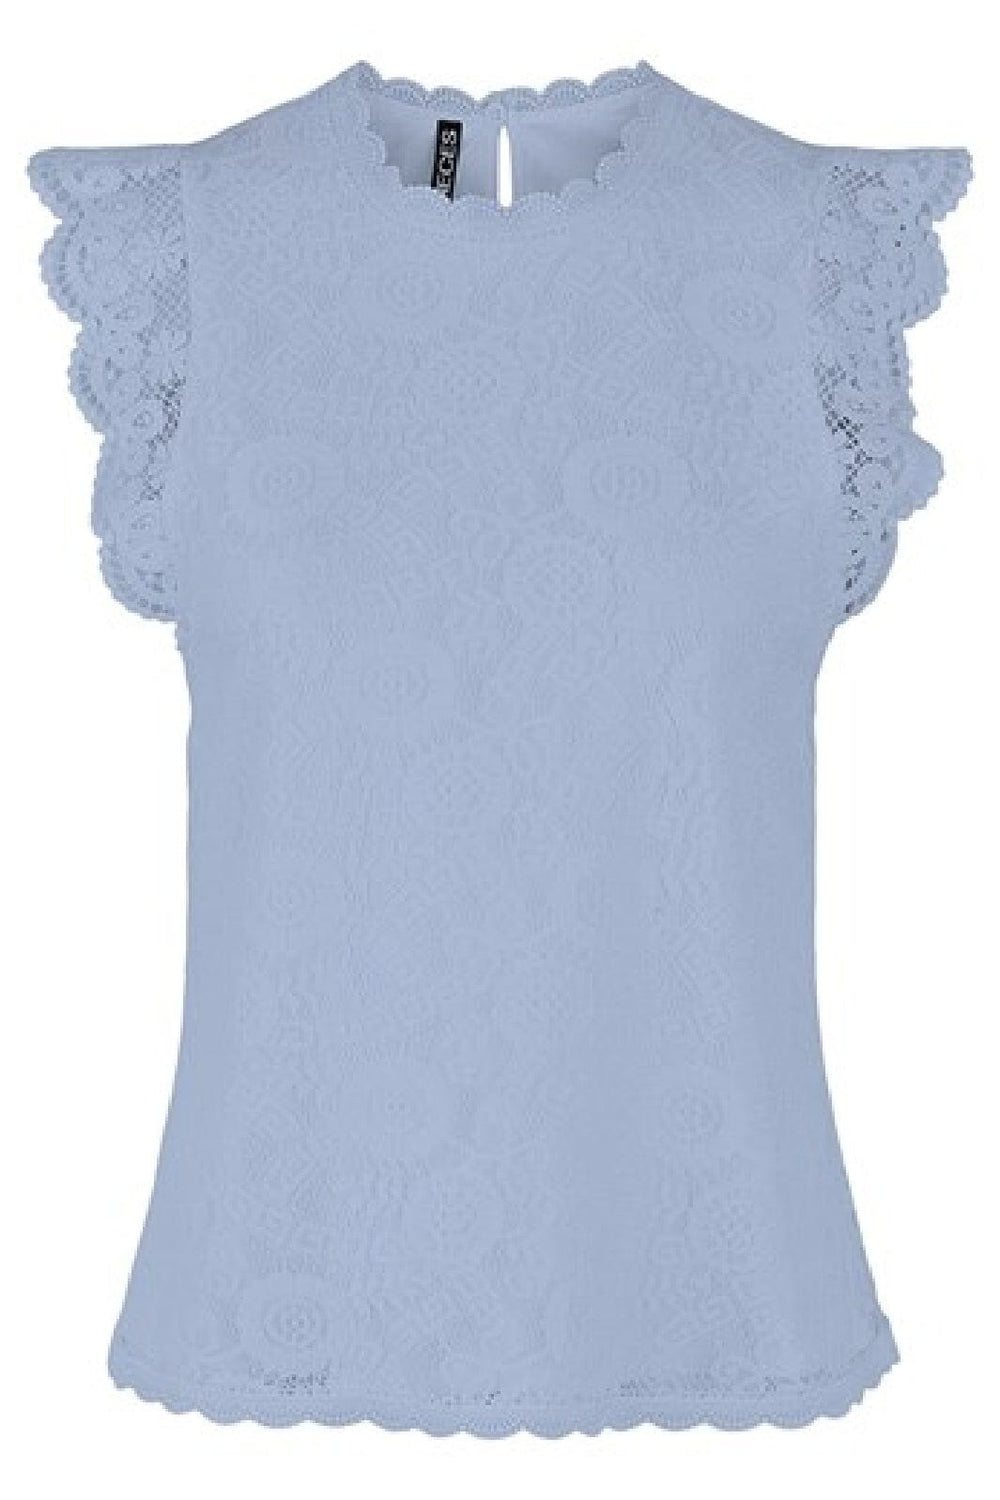 Pieces - Pcolline Sl Lace Top - 3861682 Kentucky Blue Toppe 